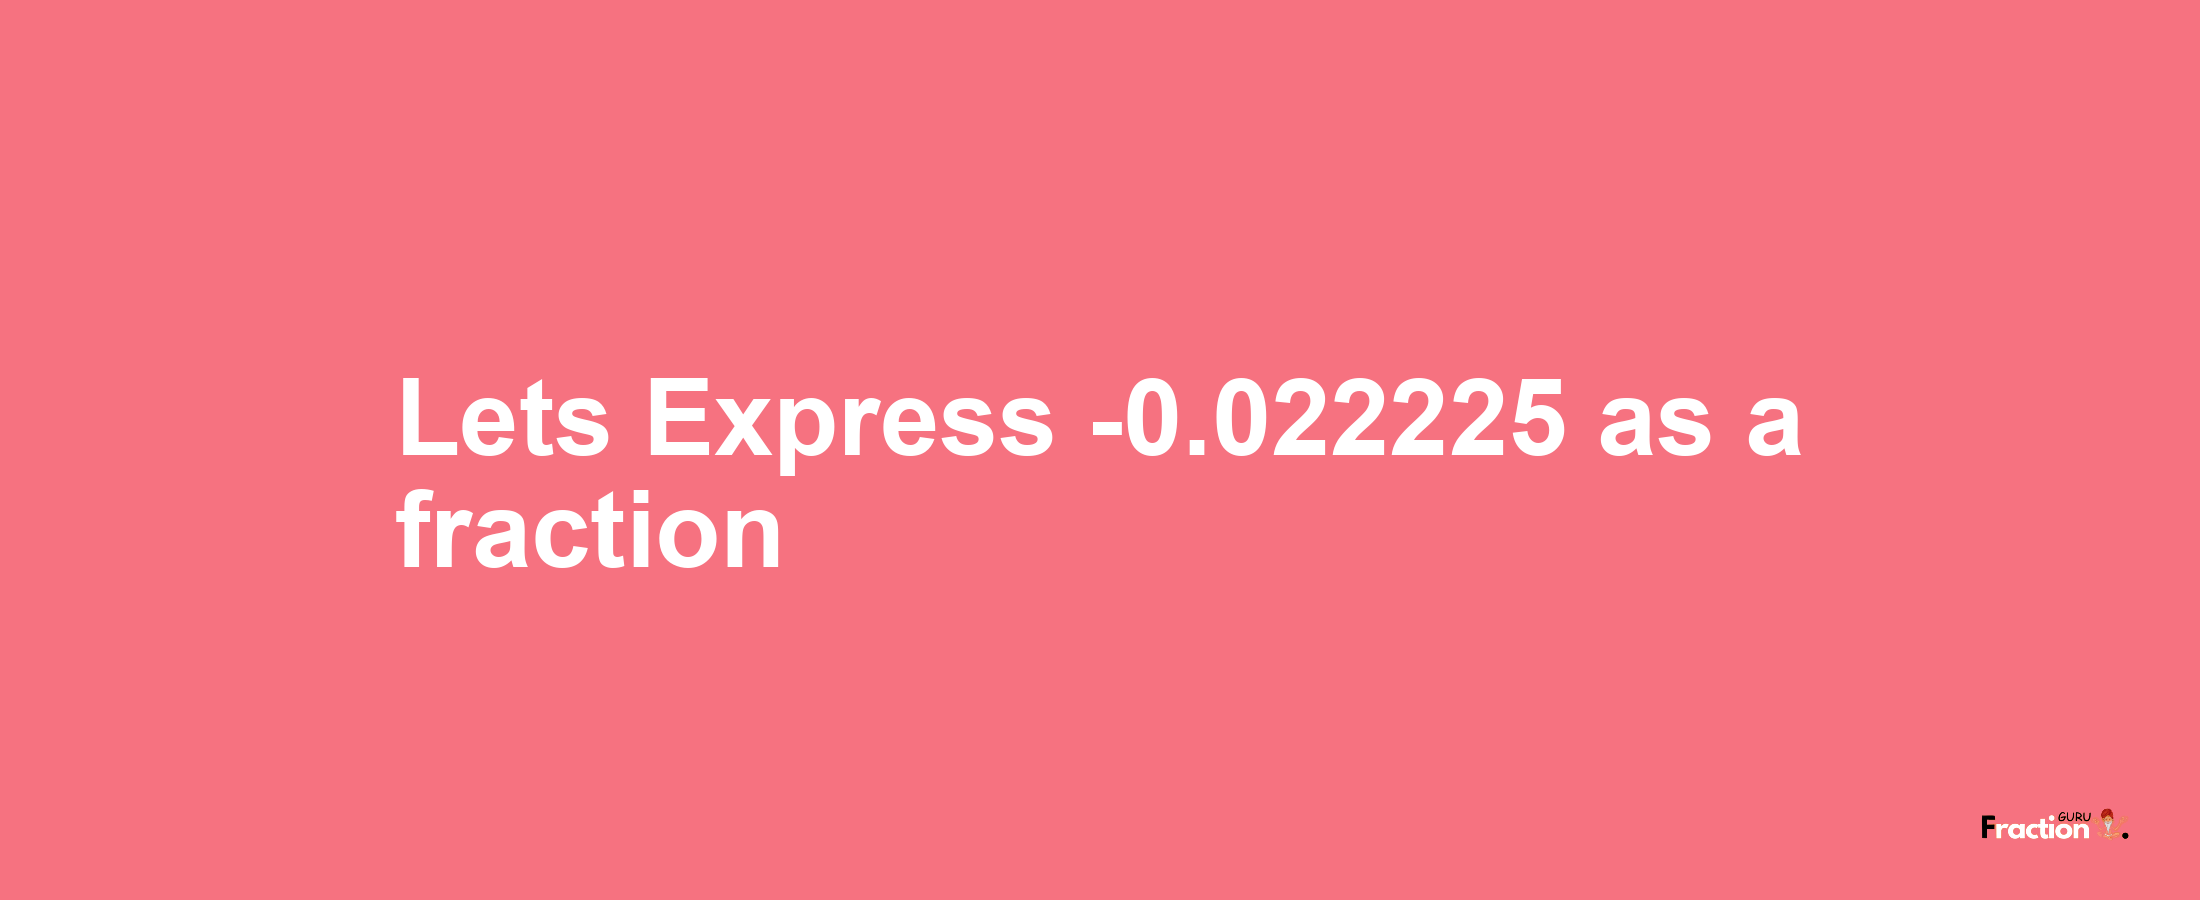 Lets Express -0.022225 as afraction